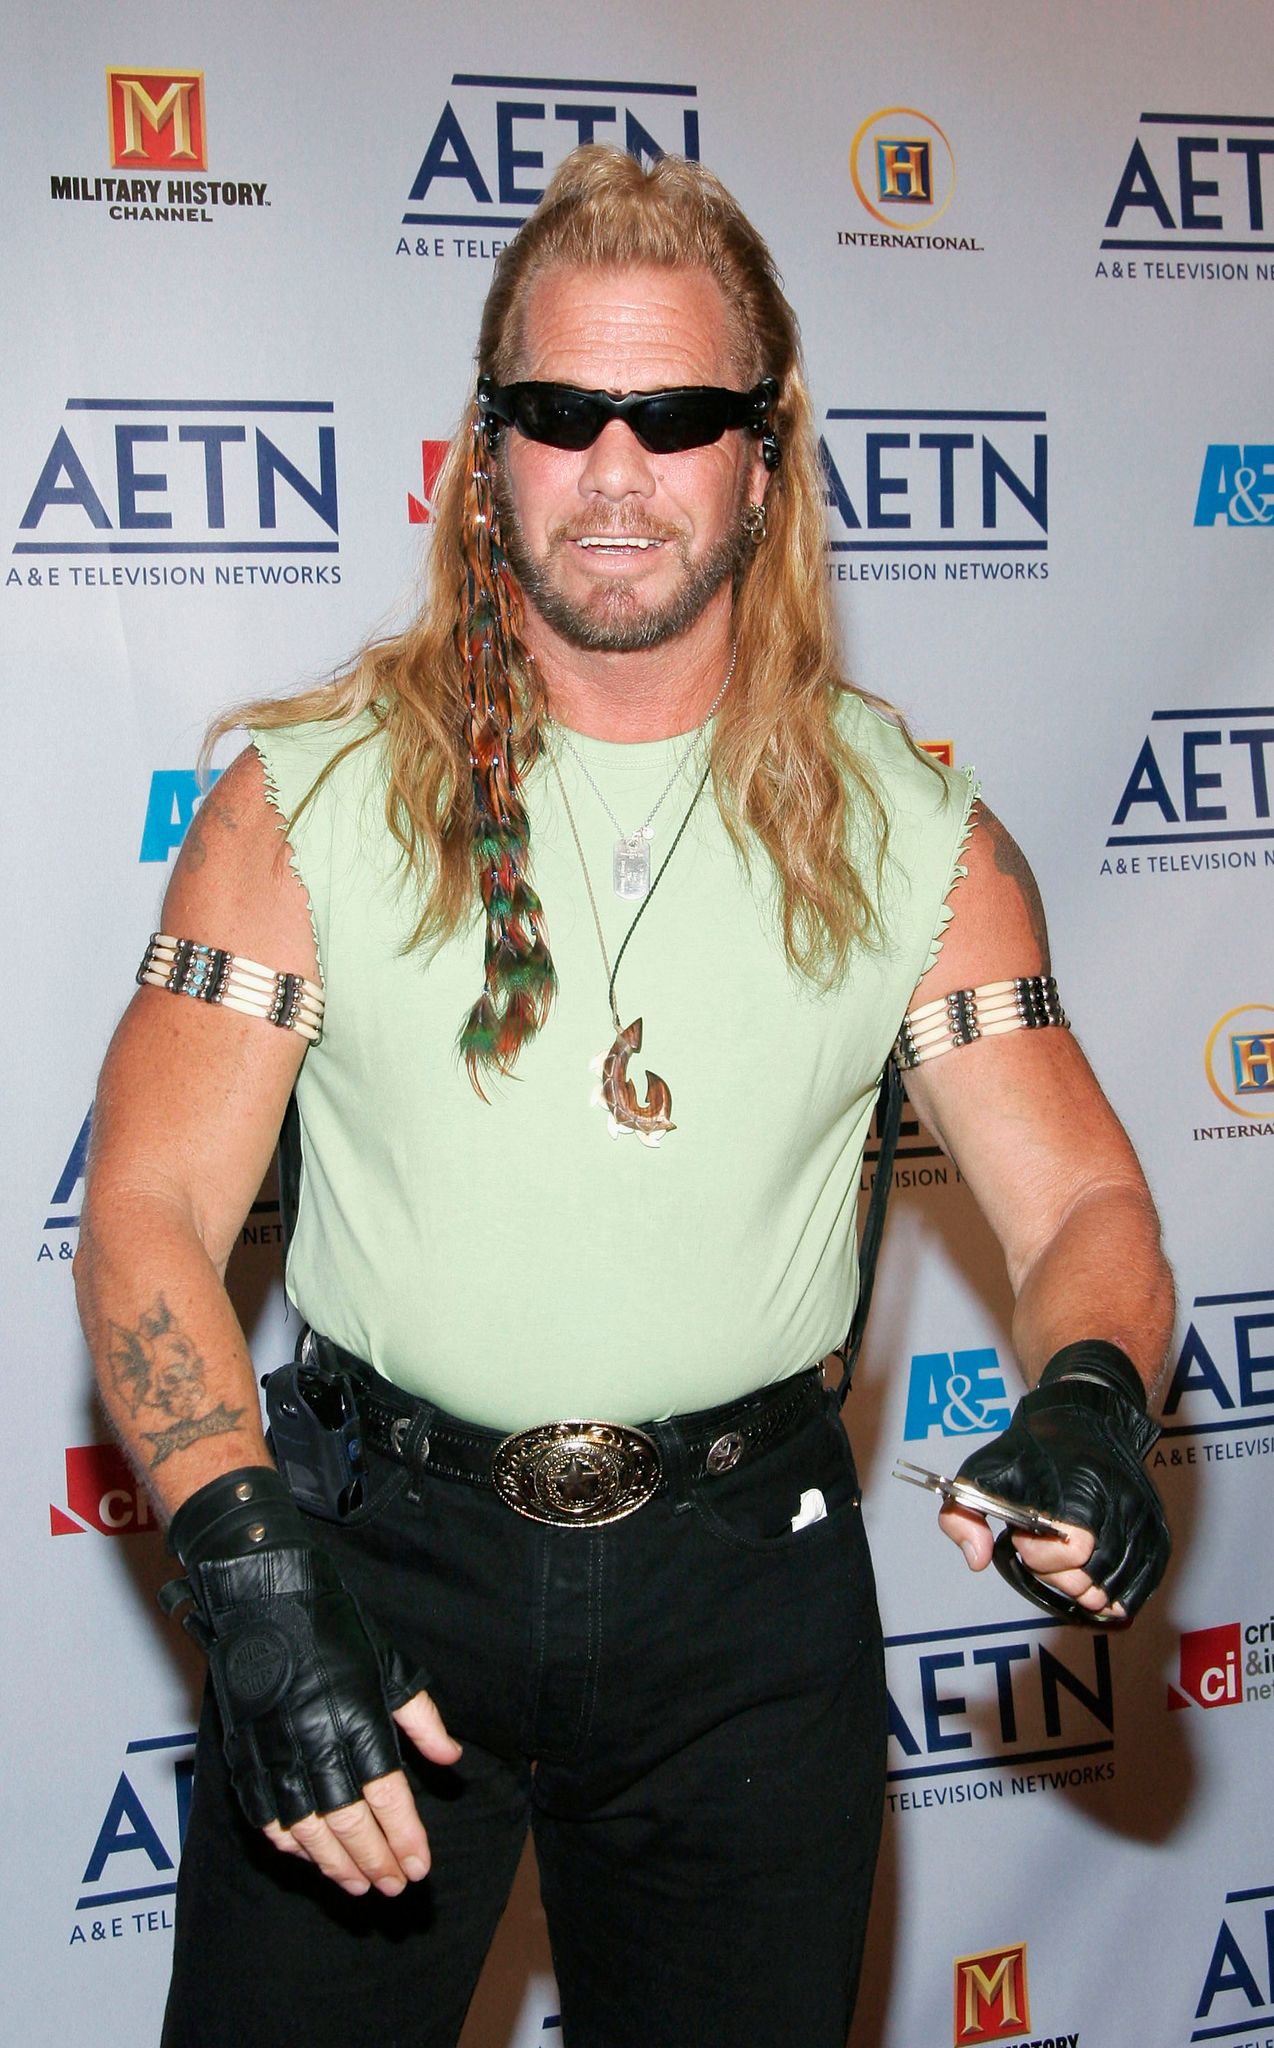 Dog The Bounty Hunter Duane "Dog" Chapman at A&E Television Networks Upfront celebration held at Rockefeller Center April 21, 2005 in New York City | Photo: Getty Images